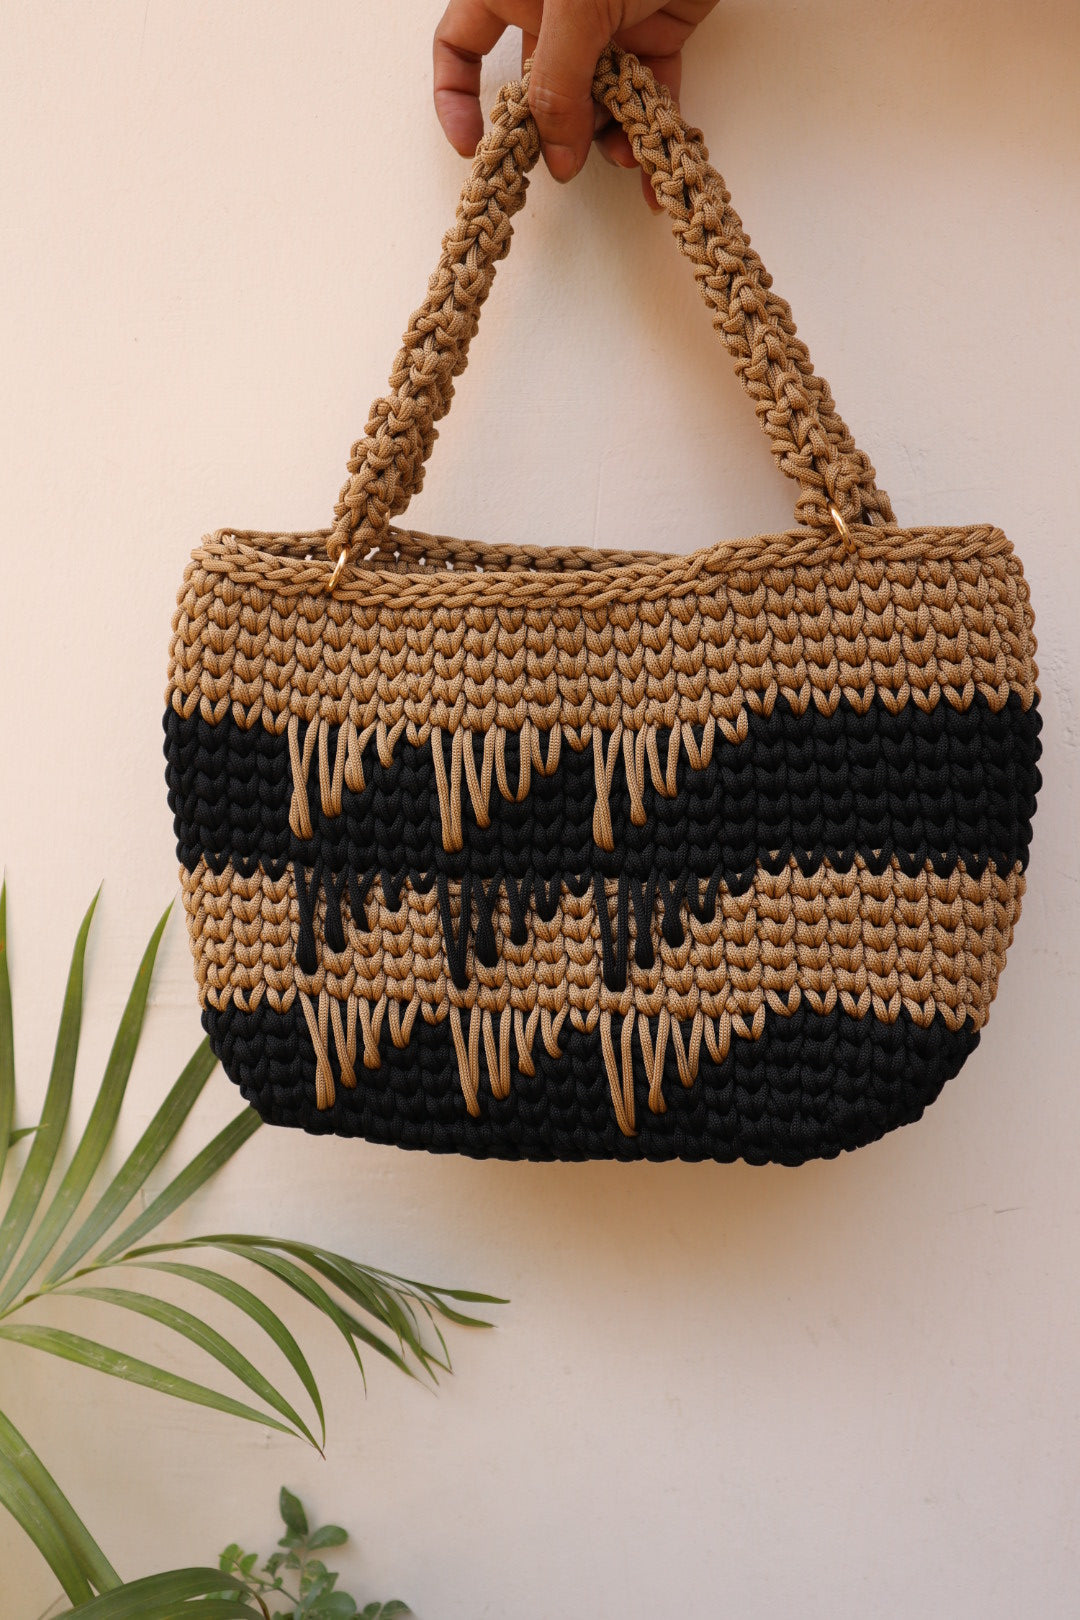 Chic Black and Brown Handcrafted Crochet Bag